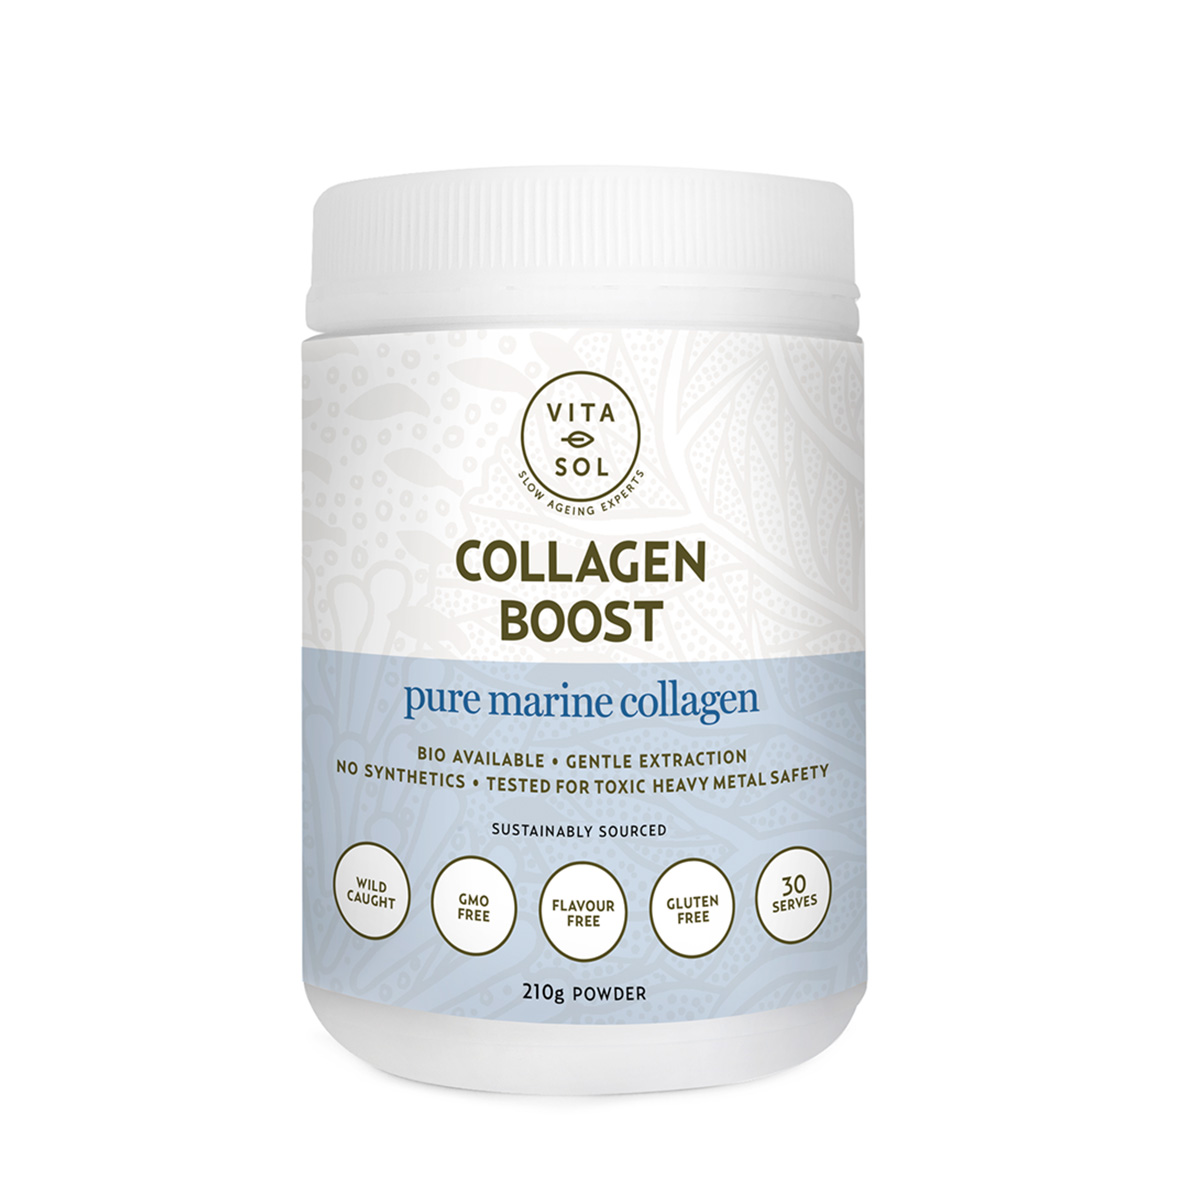 Collagen Boost – Wholefood Powder | LV BEAUTY ROOM